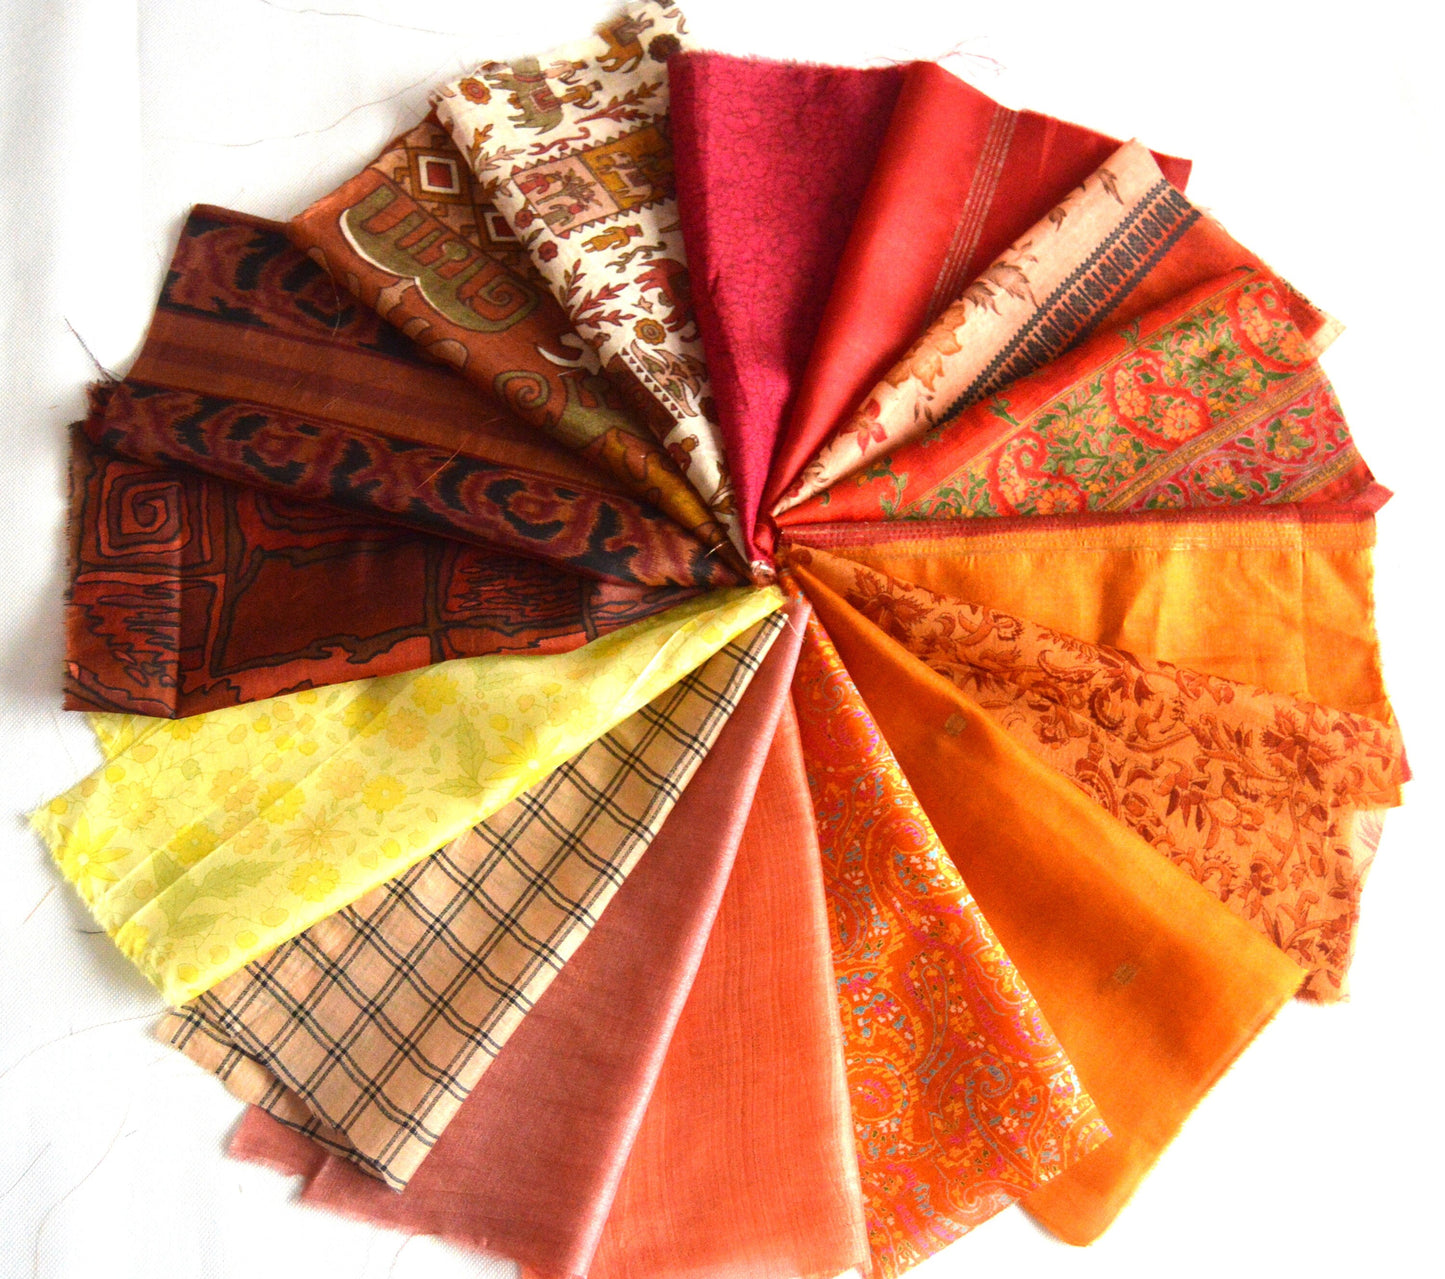 8 Inch x 16 Pieces Autumn Shades Upcycled Sari Silk Squares